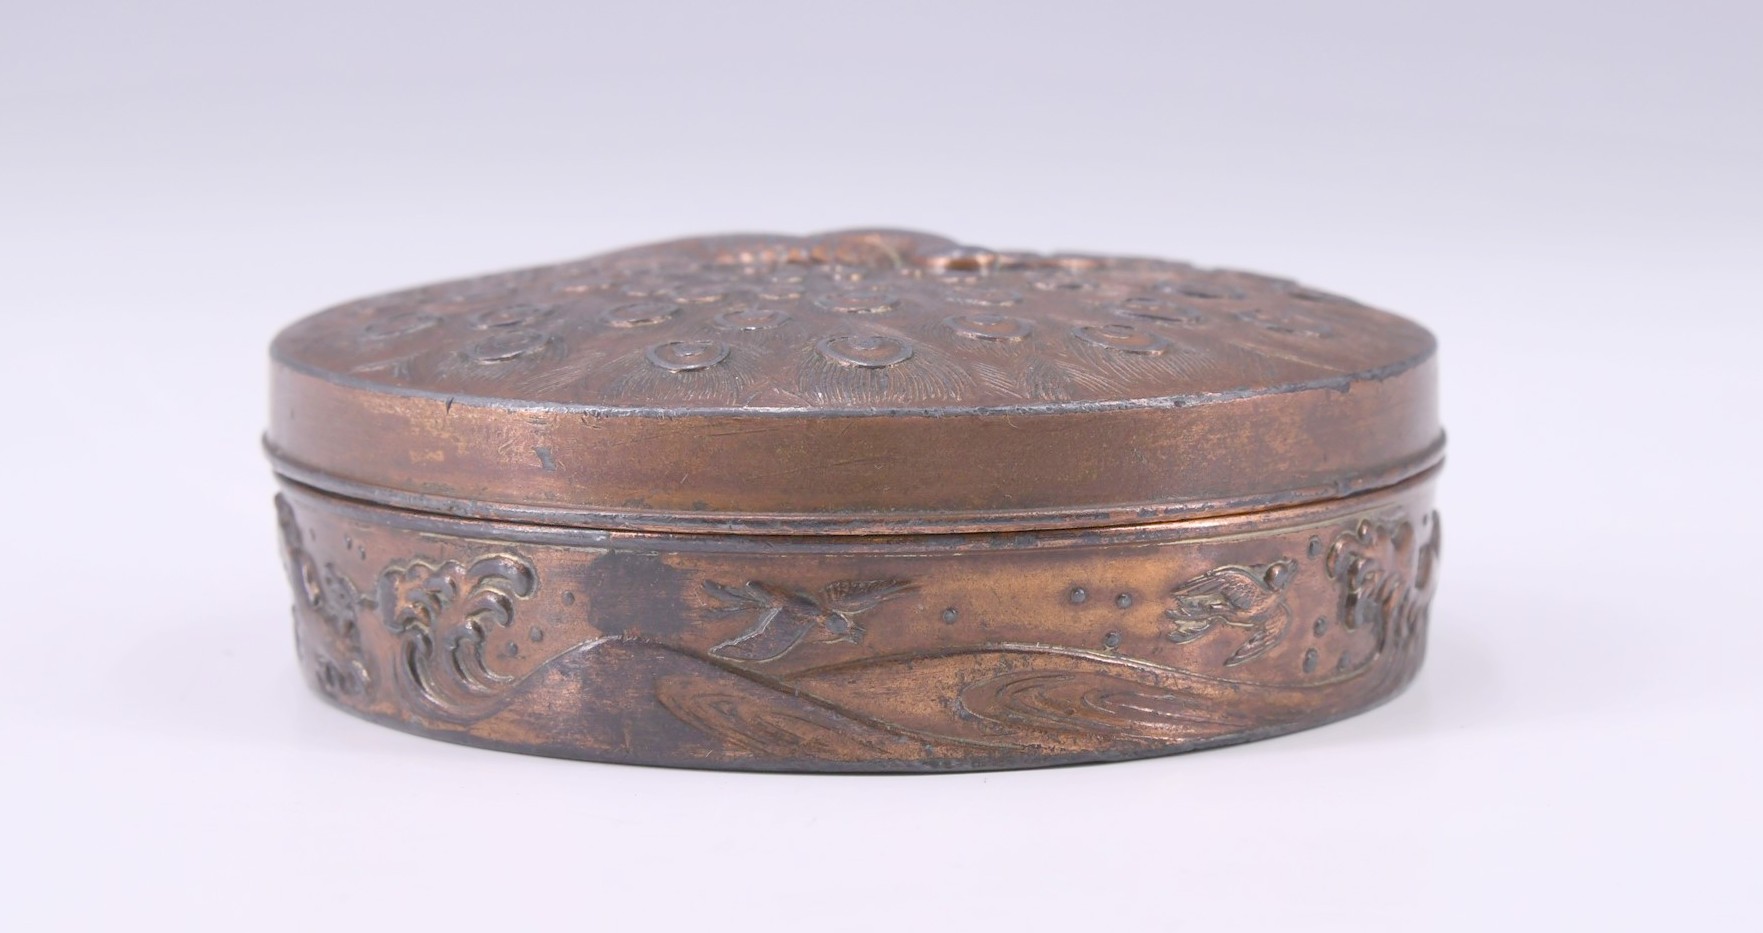 An early 20th century Myanmarese EPBM trinket box decorated in depiction of a peacock together - Image 9 of 10